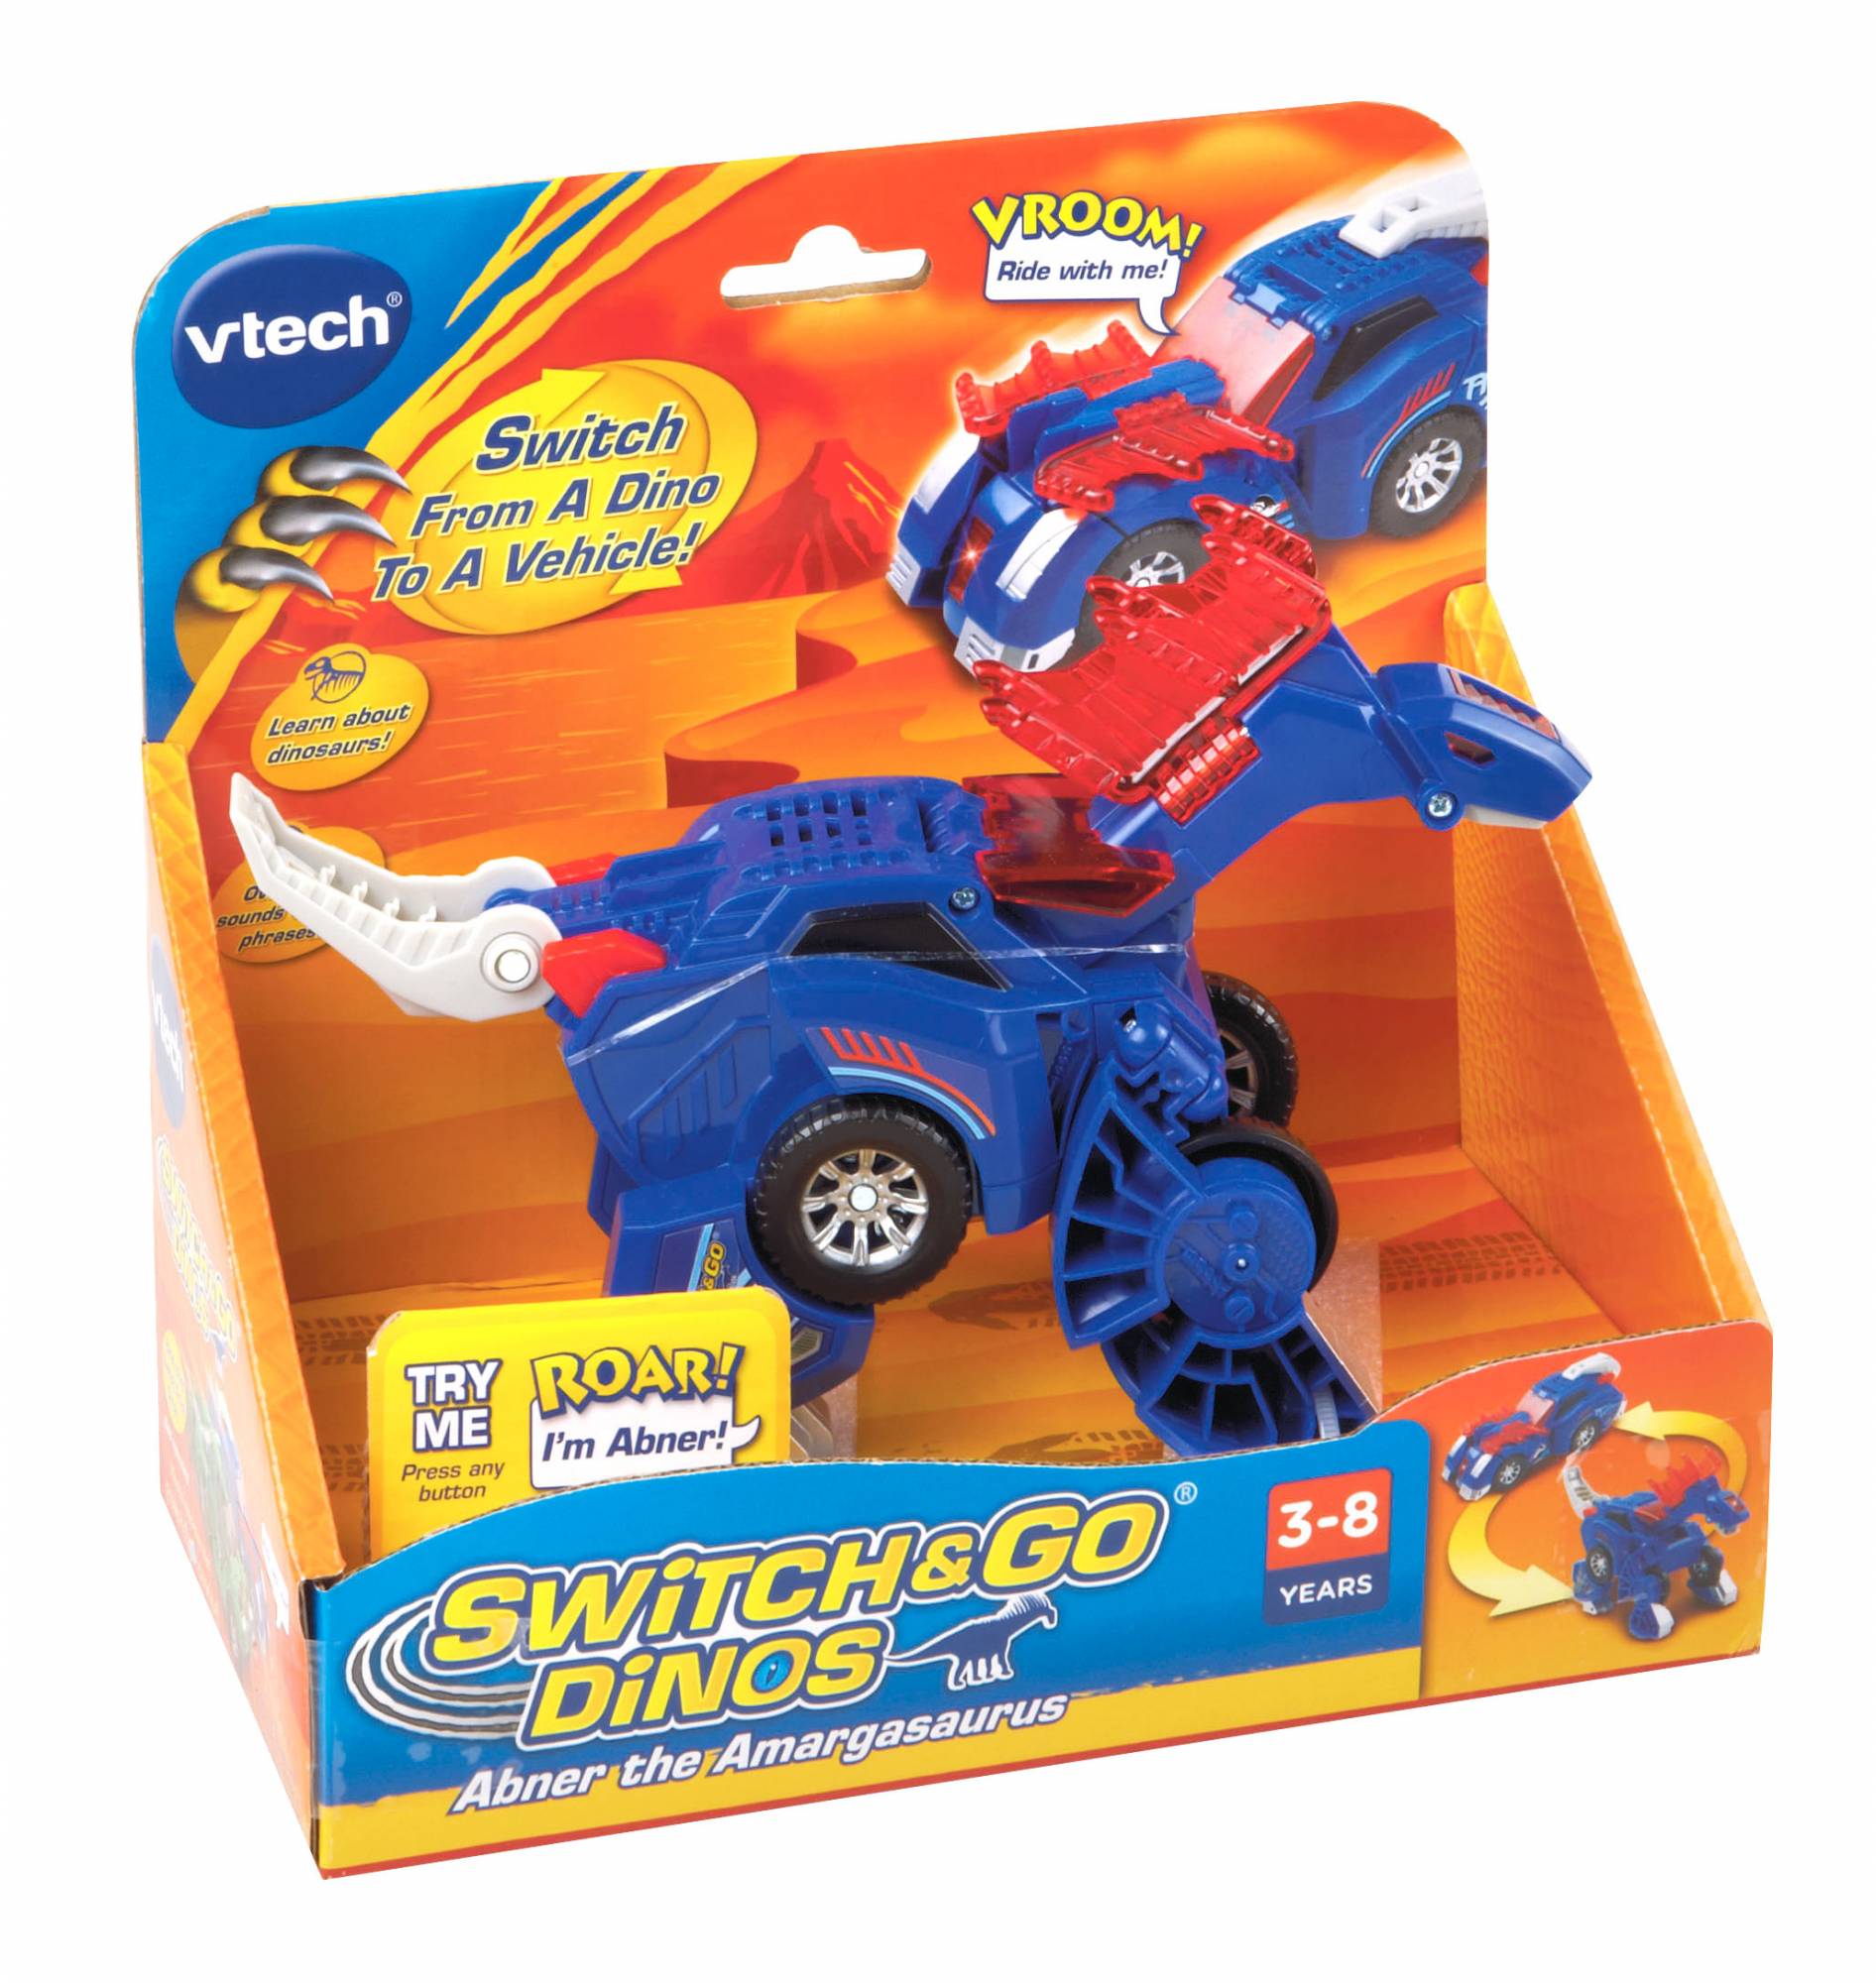 DINOSAURS The Switch & Go Dinosaur by Vtech TheEngineeringFamily